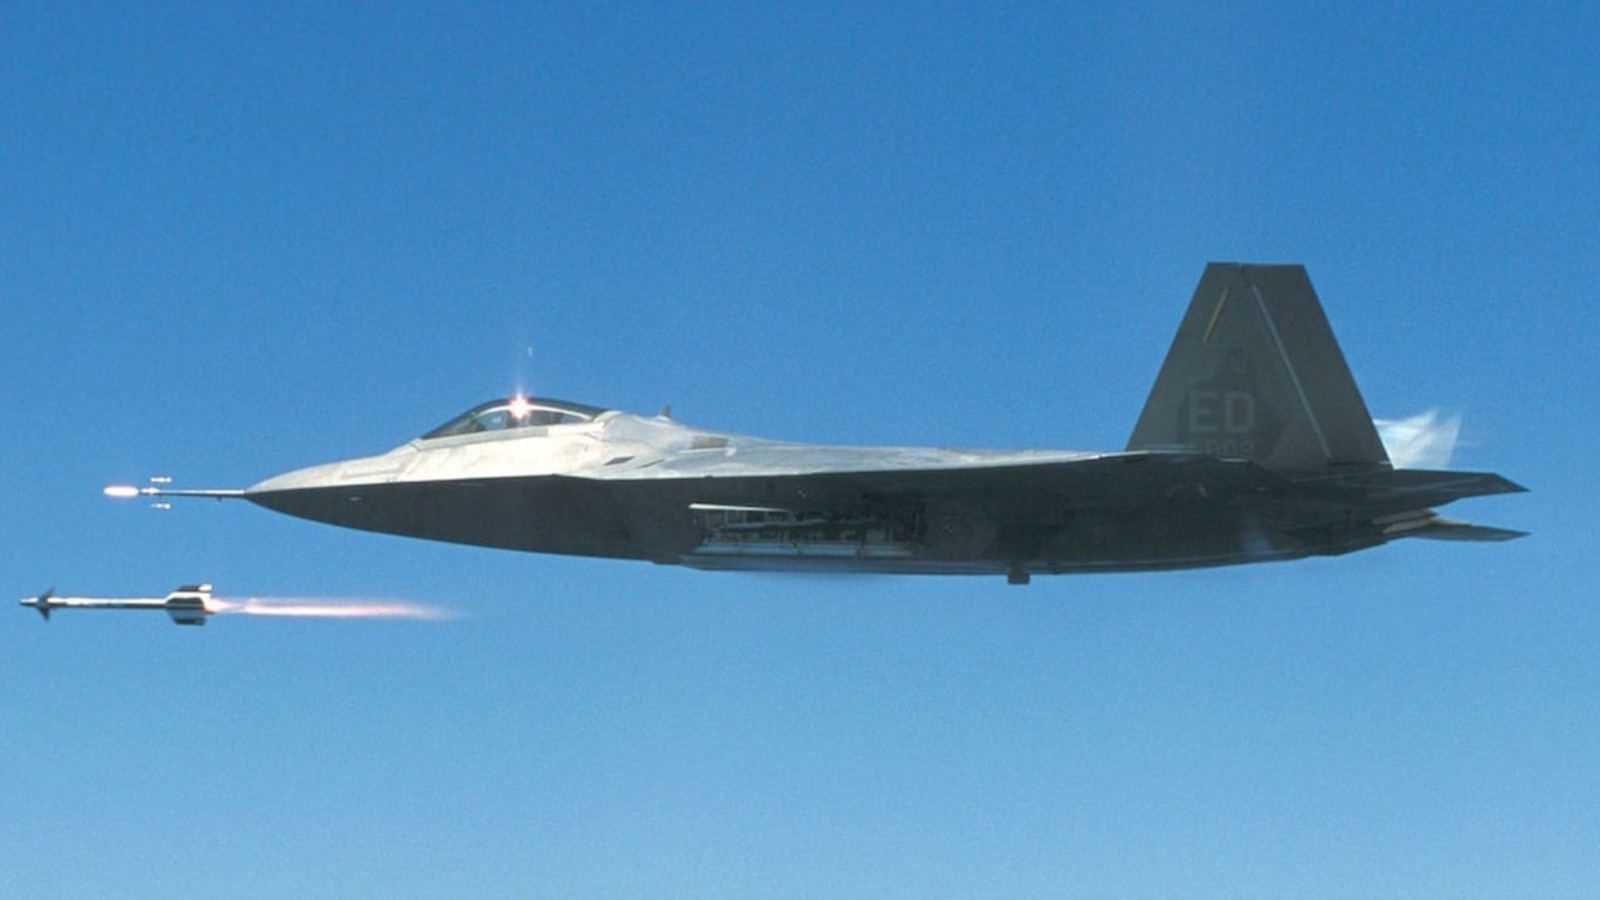 Why The U.S. Air Force Wants To Retire The F-22 Raptor Fighter Jet – SlashGear